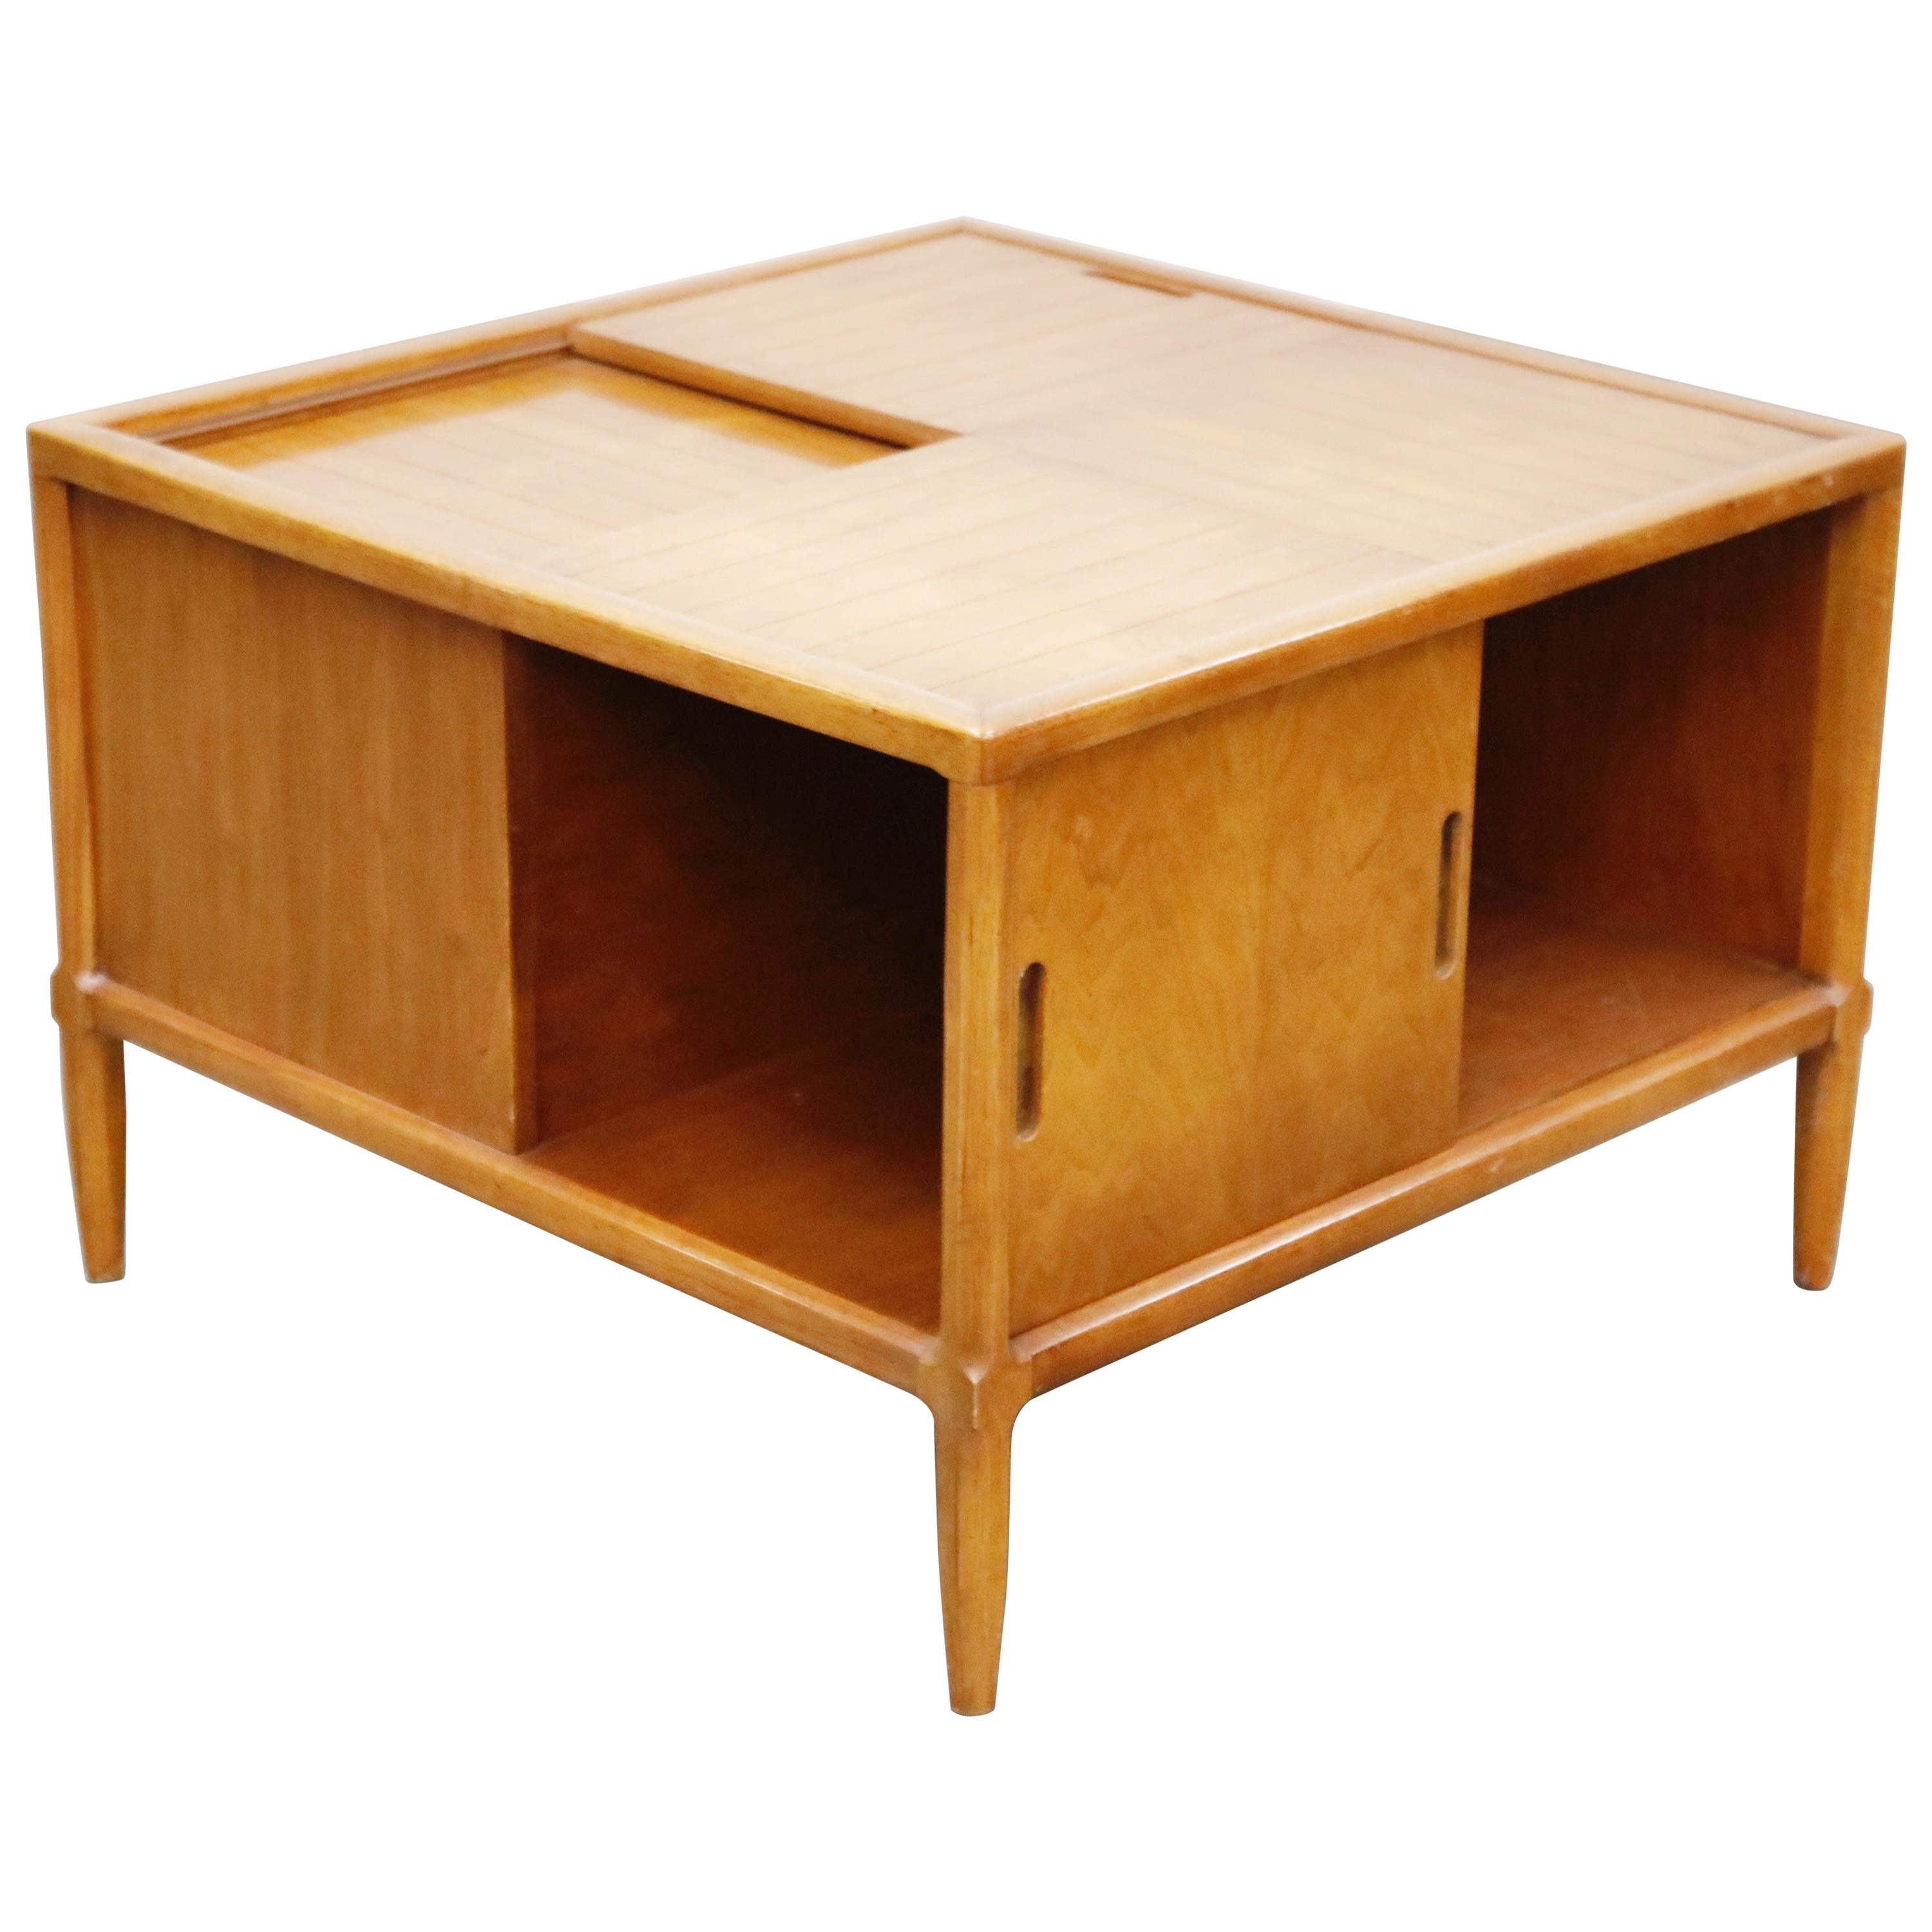 Tomlinson Sophisticate Cocktail Bar and Storage Coffee Table, 1950s, Signed